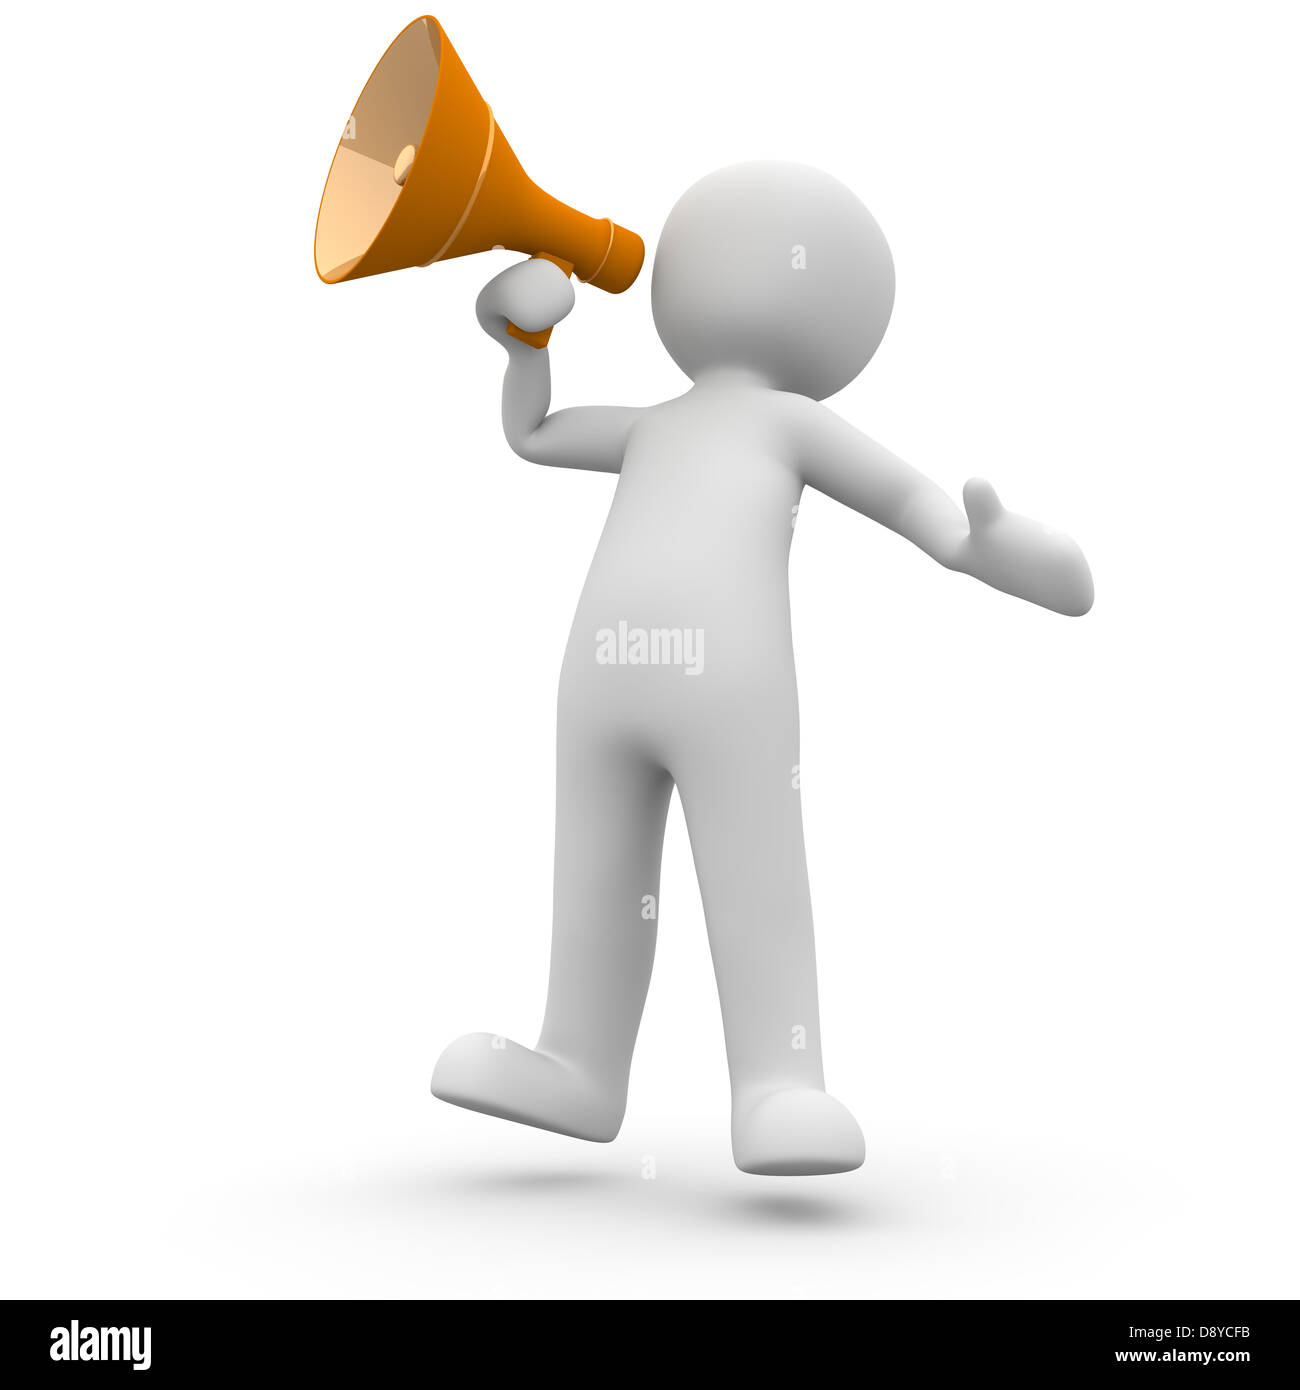 A character speaks loudly about a megaphone in English. Stock Photo